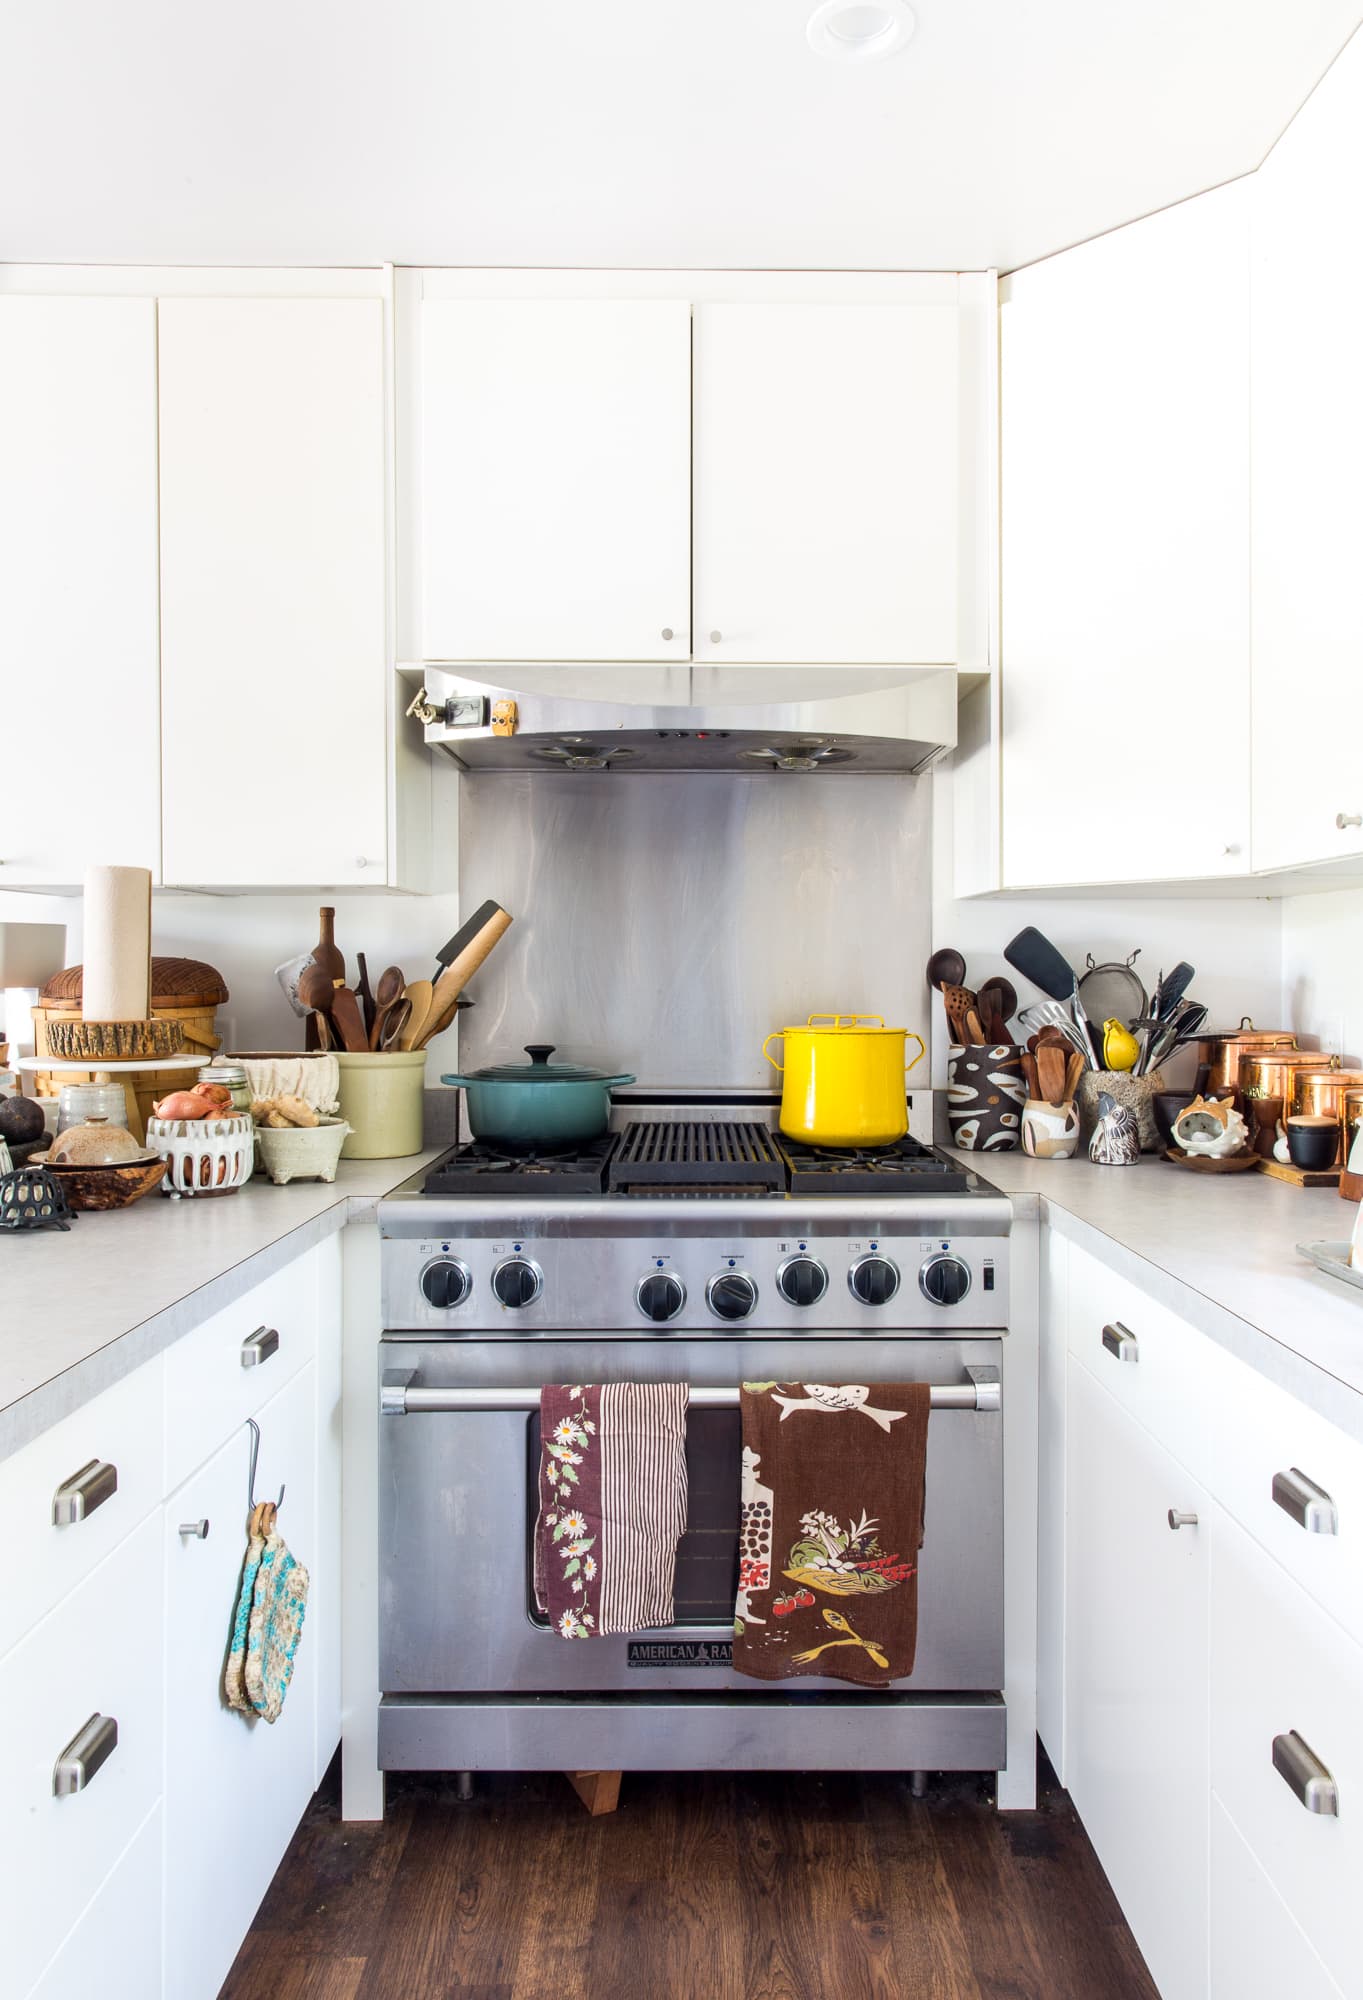 This Is How Often You Should Replace Common Kitchen Tools